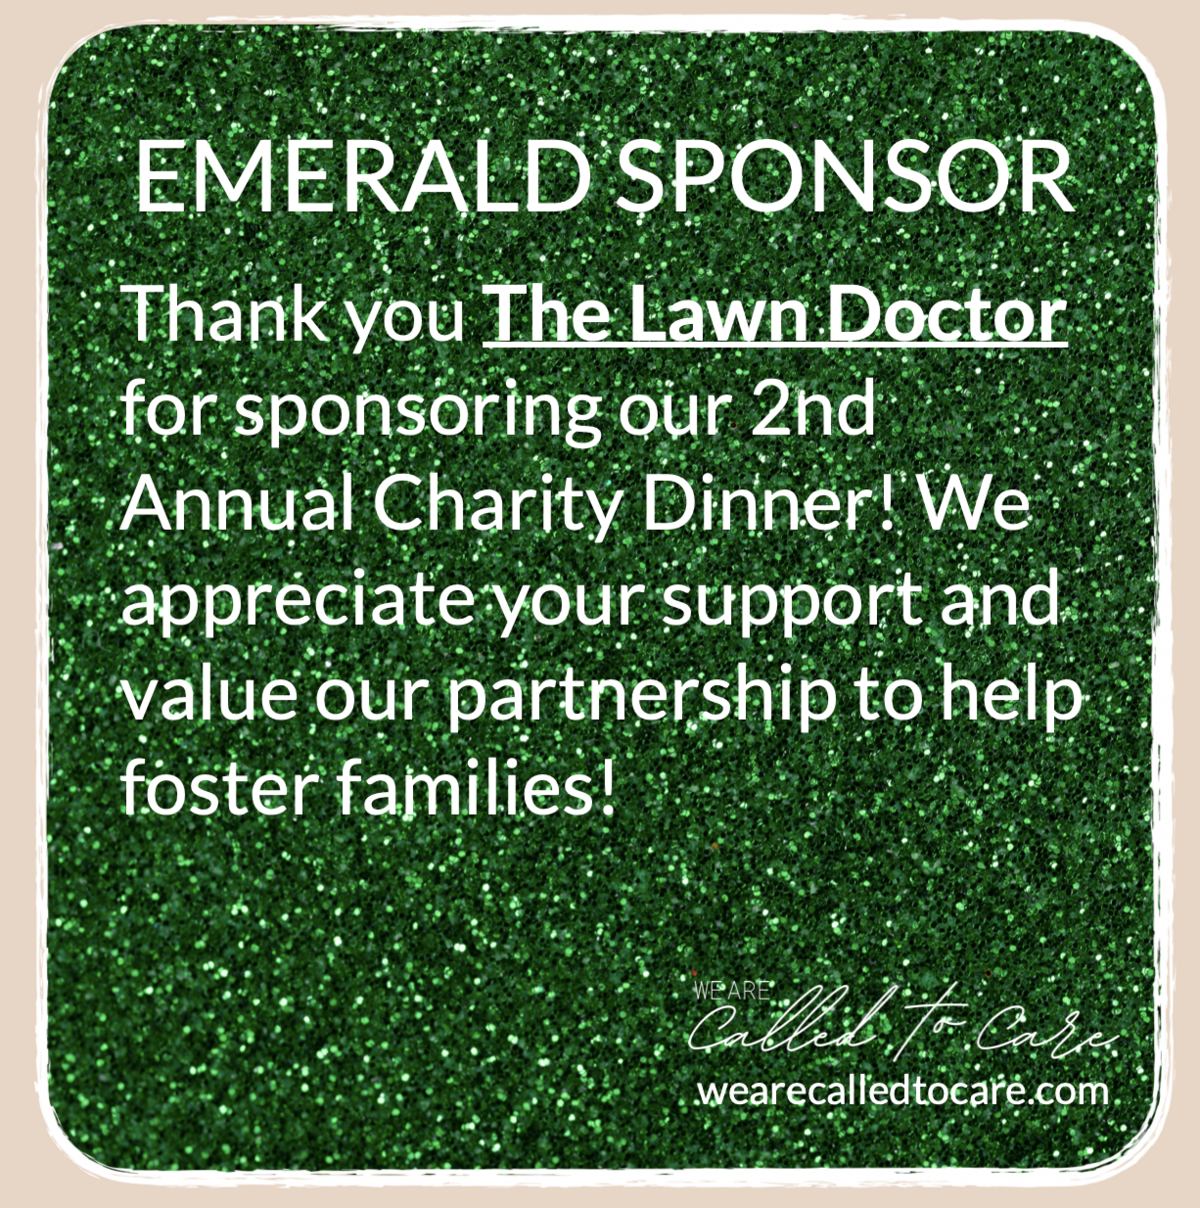 EMERALD - THE LAWN DOCTOR